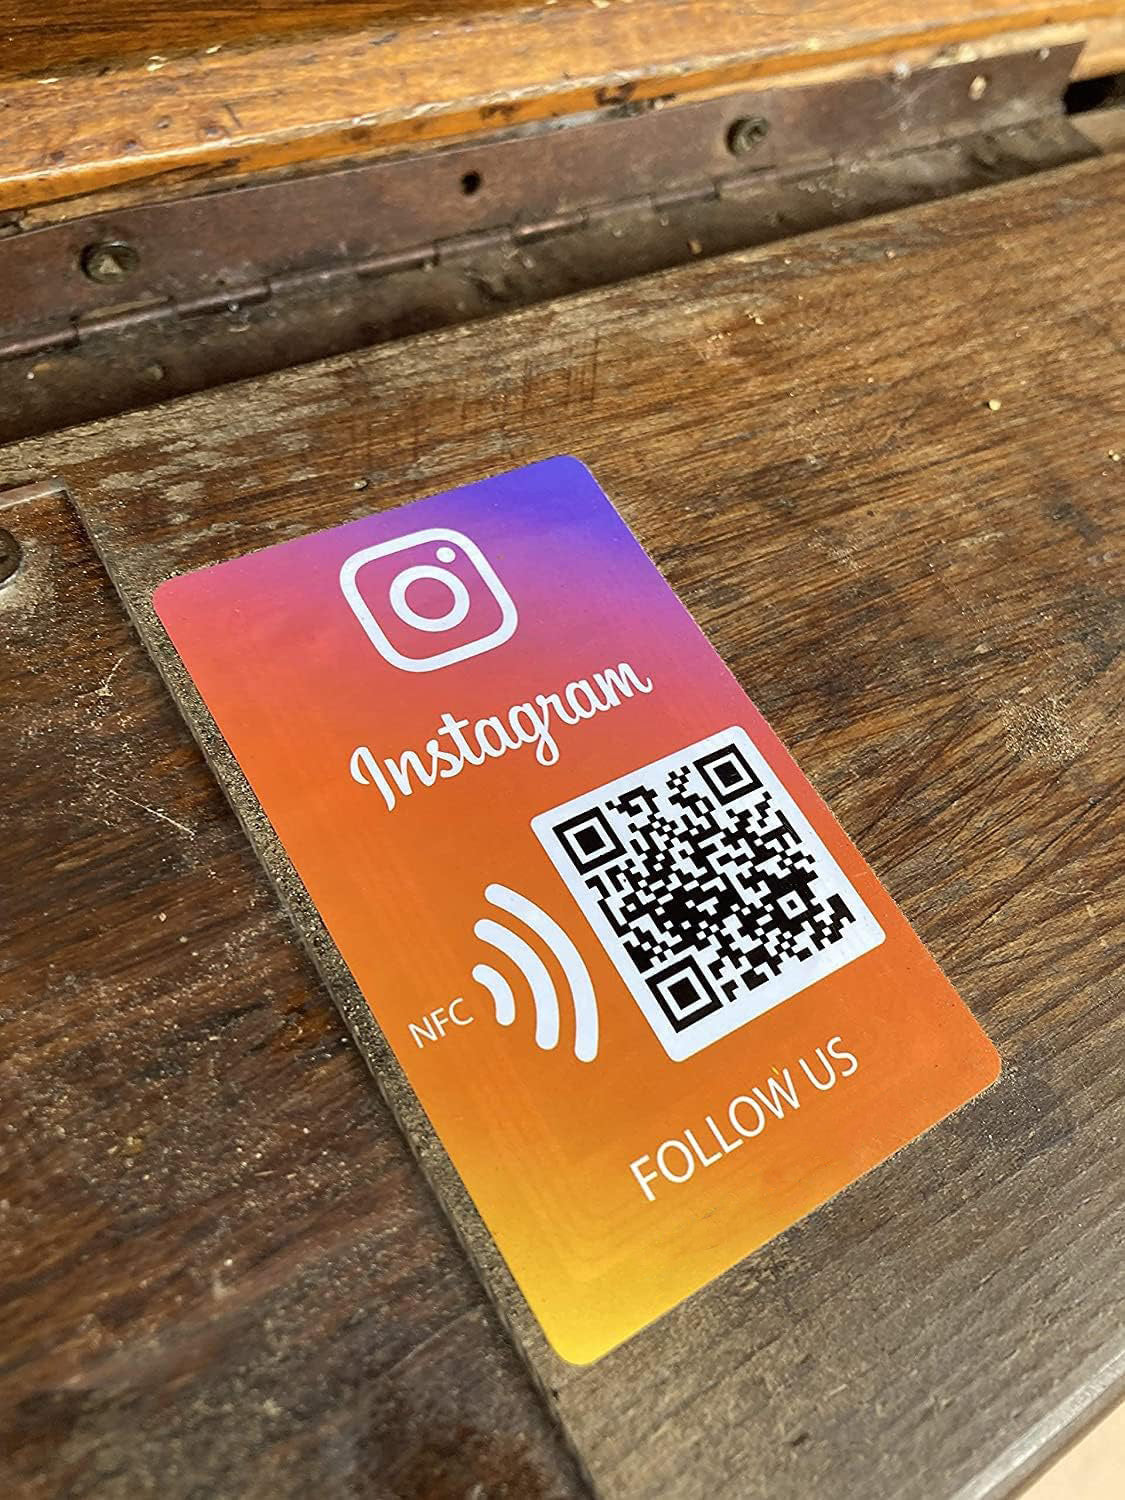 Follow us on Instagram sticker/card with QR & NFC